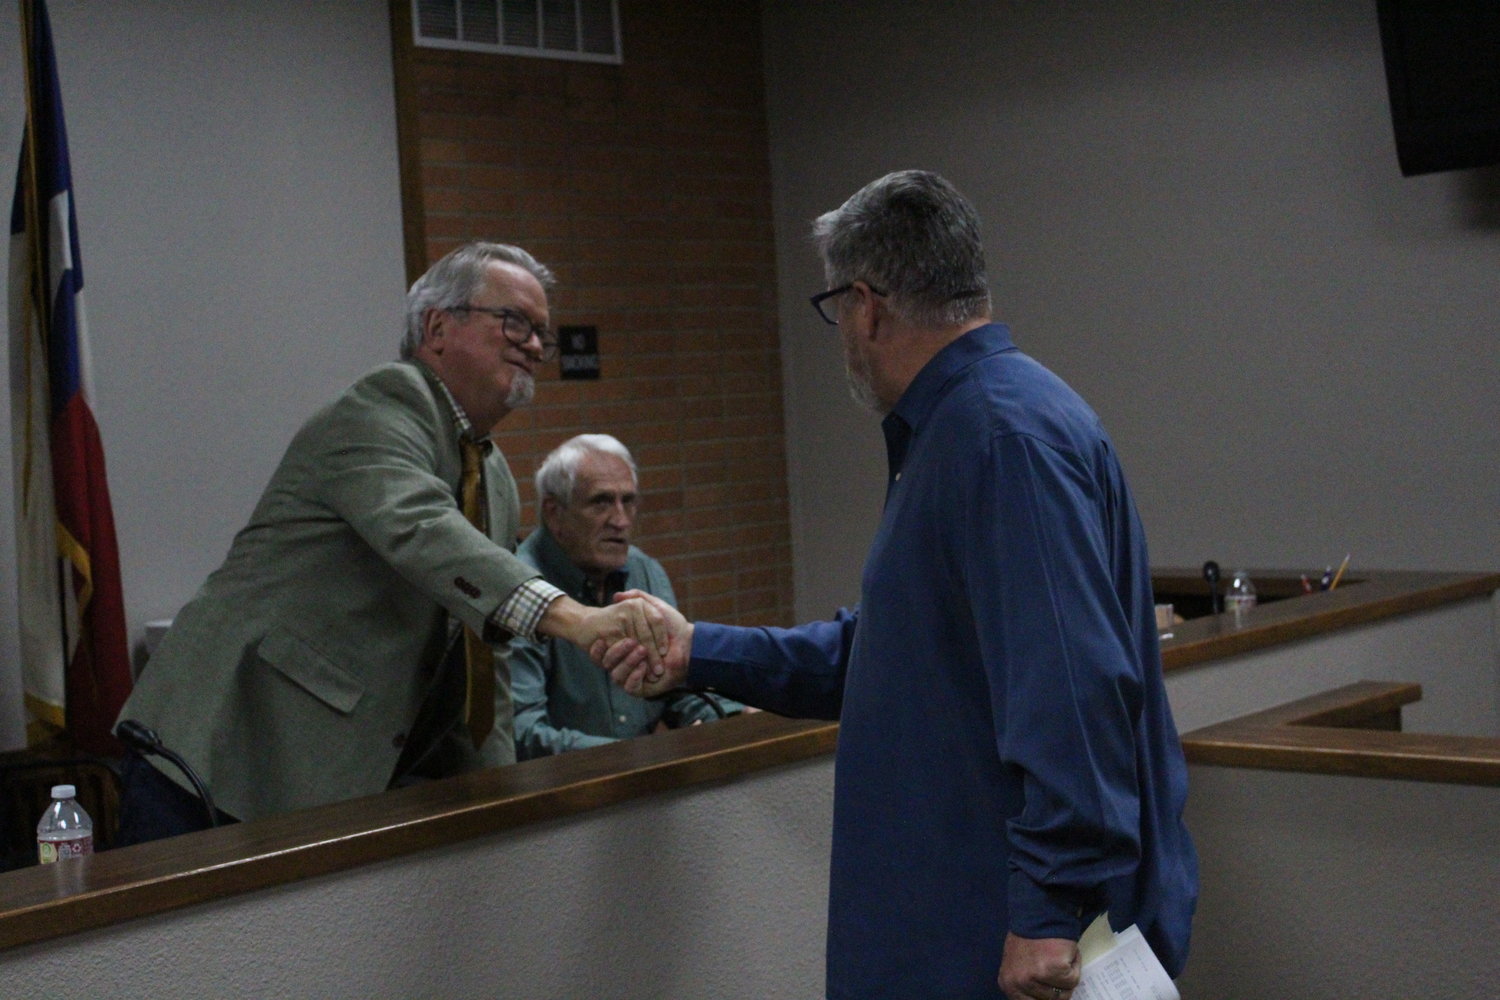 Mayor Steve Sucher congratulates Tim Crow on being appointed Gonzales city manager full time.